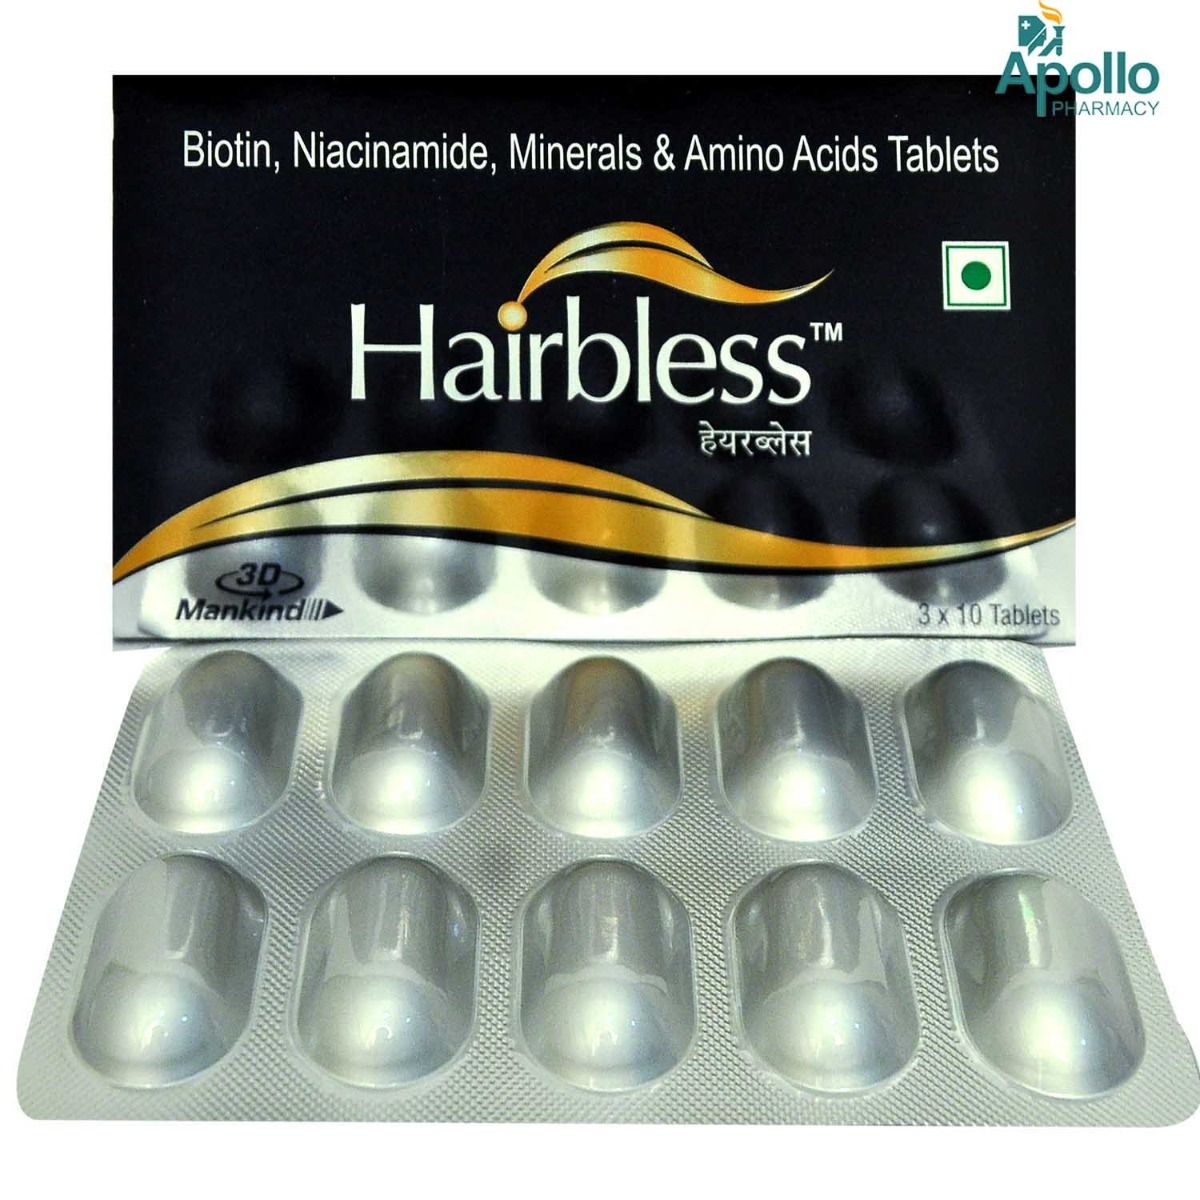 Hairbless Tablet 10's Price, Uses, Side Effects, Composition - Apollo  Pharmacy